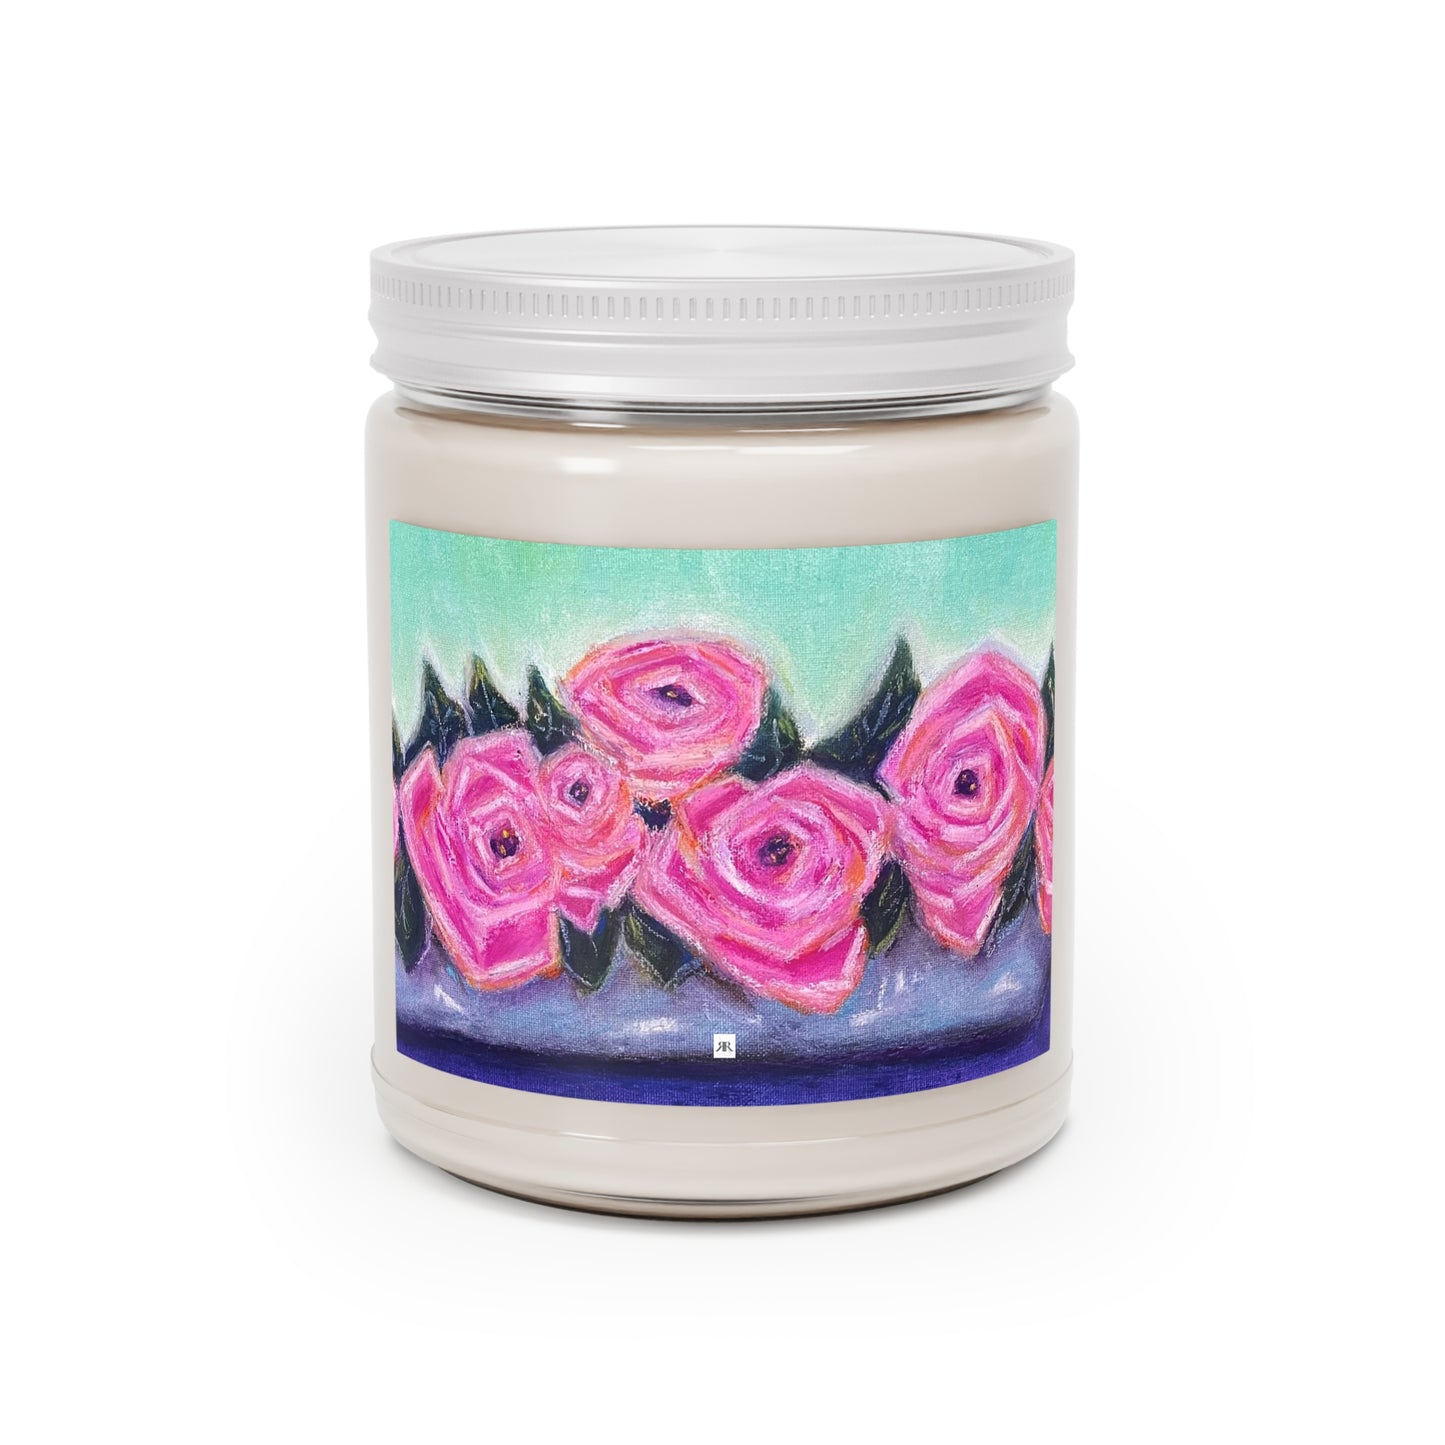 Tin Full of Roses Scented Candle 9oz